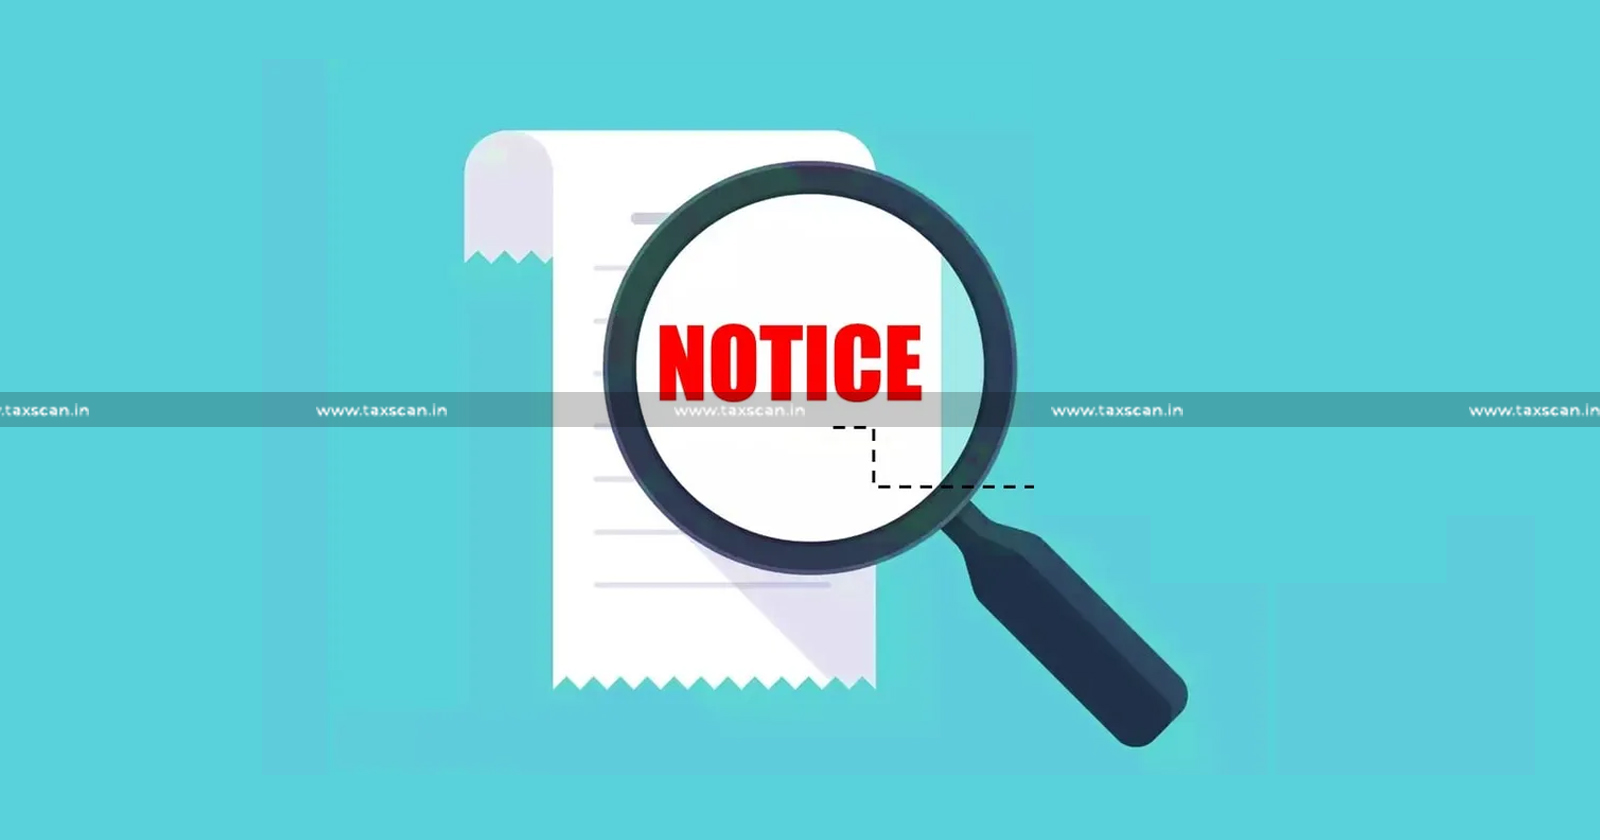 Non - Compliance of E - notice due to non - Reaching to Concerned Officials as Employee Handling Matter left Company is a Reasonable Cause - ITAT - TAXSCAN